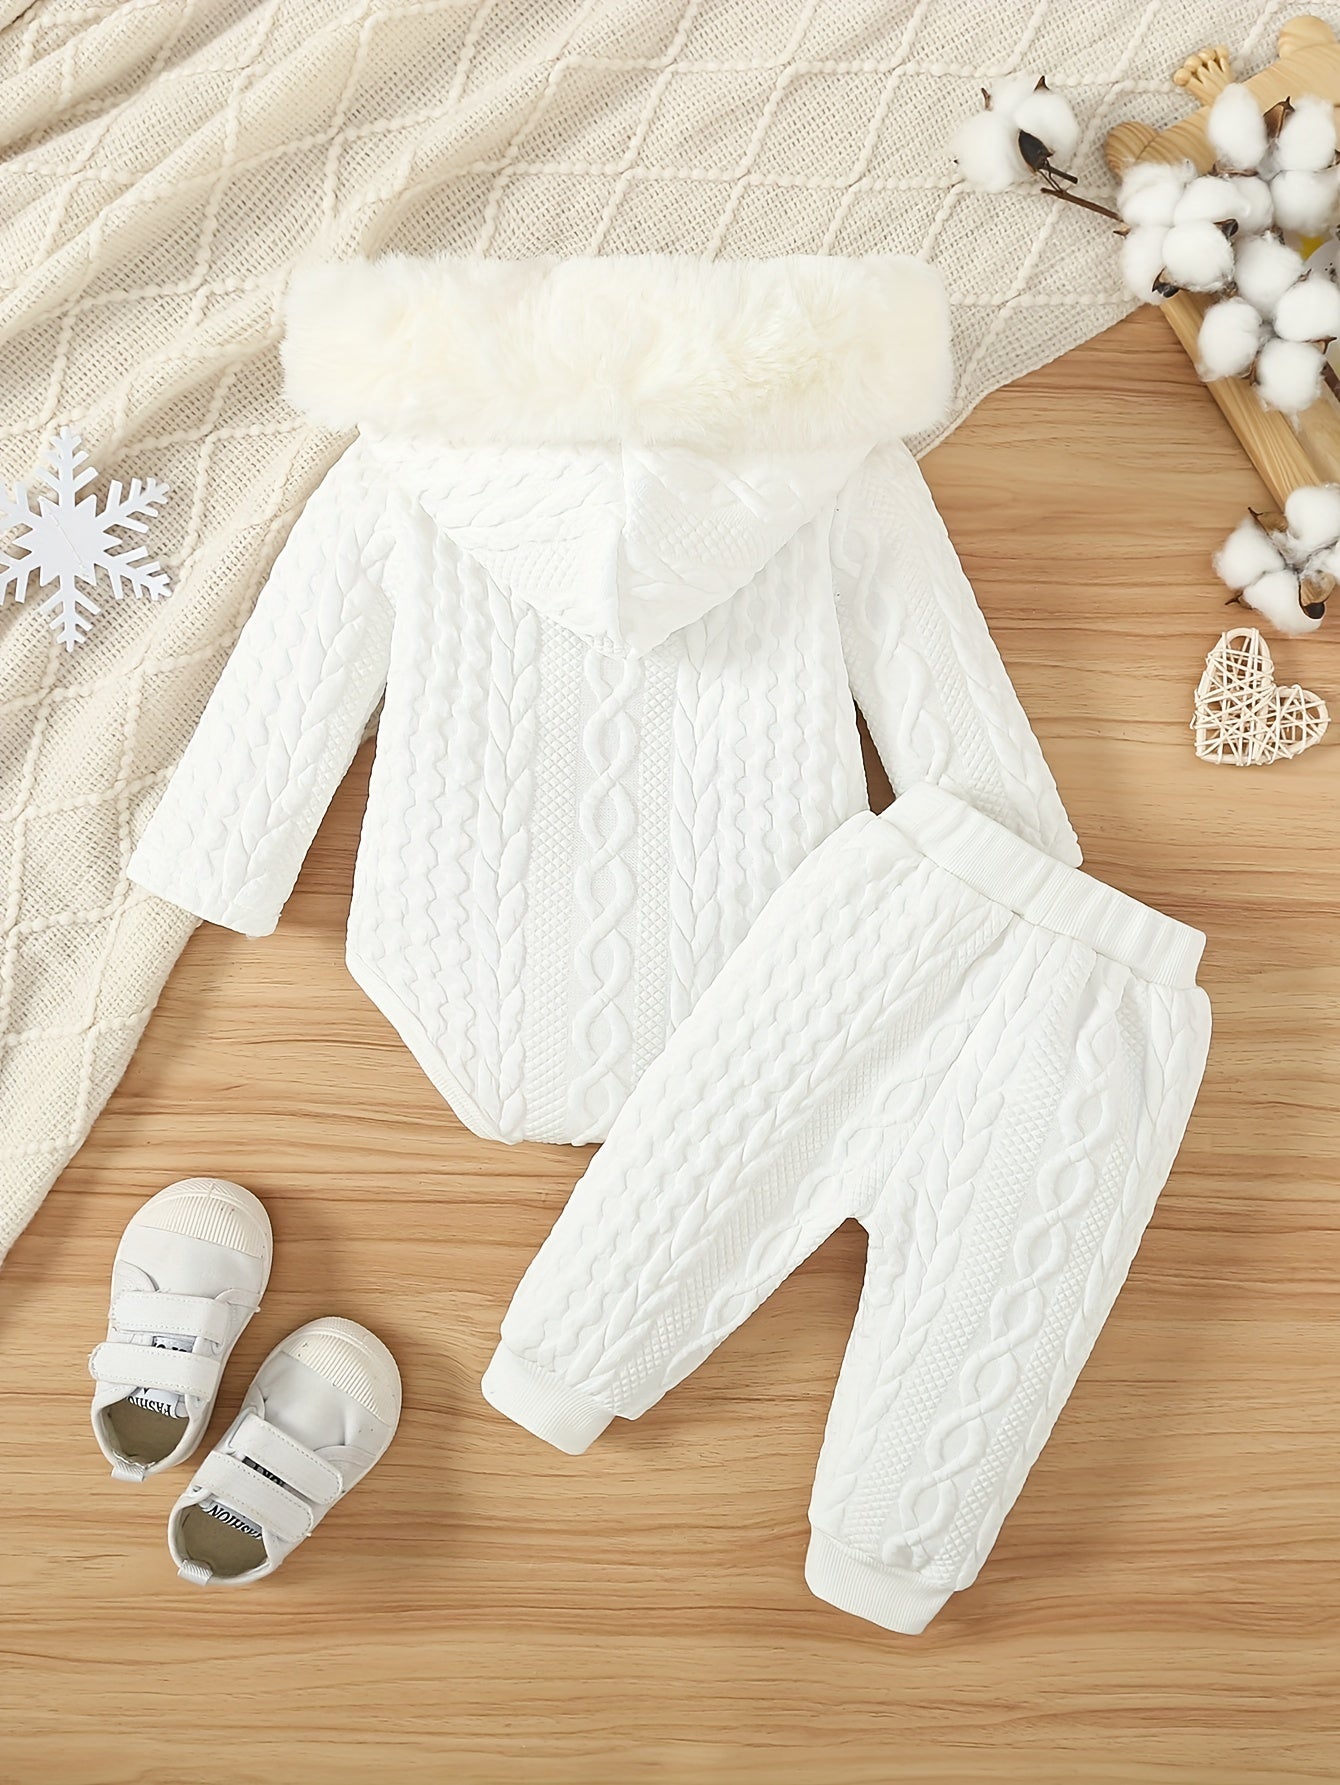 Toddler Baby Autumn Winter Thermal Outfit, Thick Furry Hooded Romper + Pants Casual Set